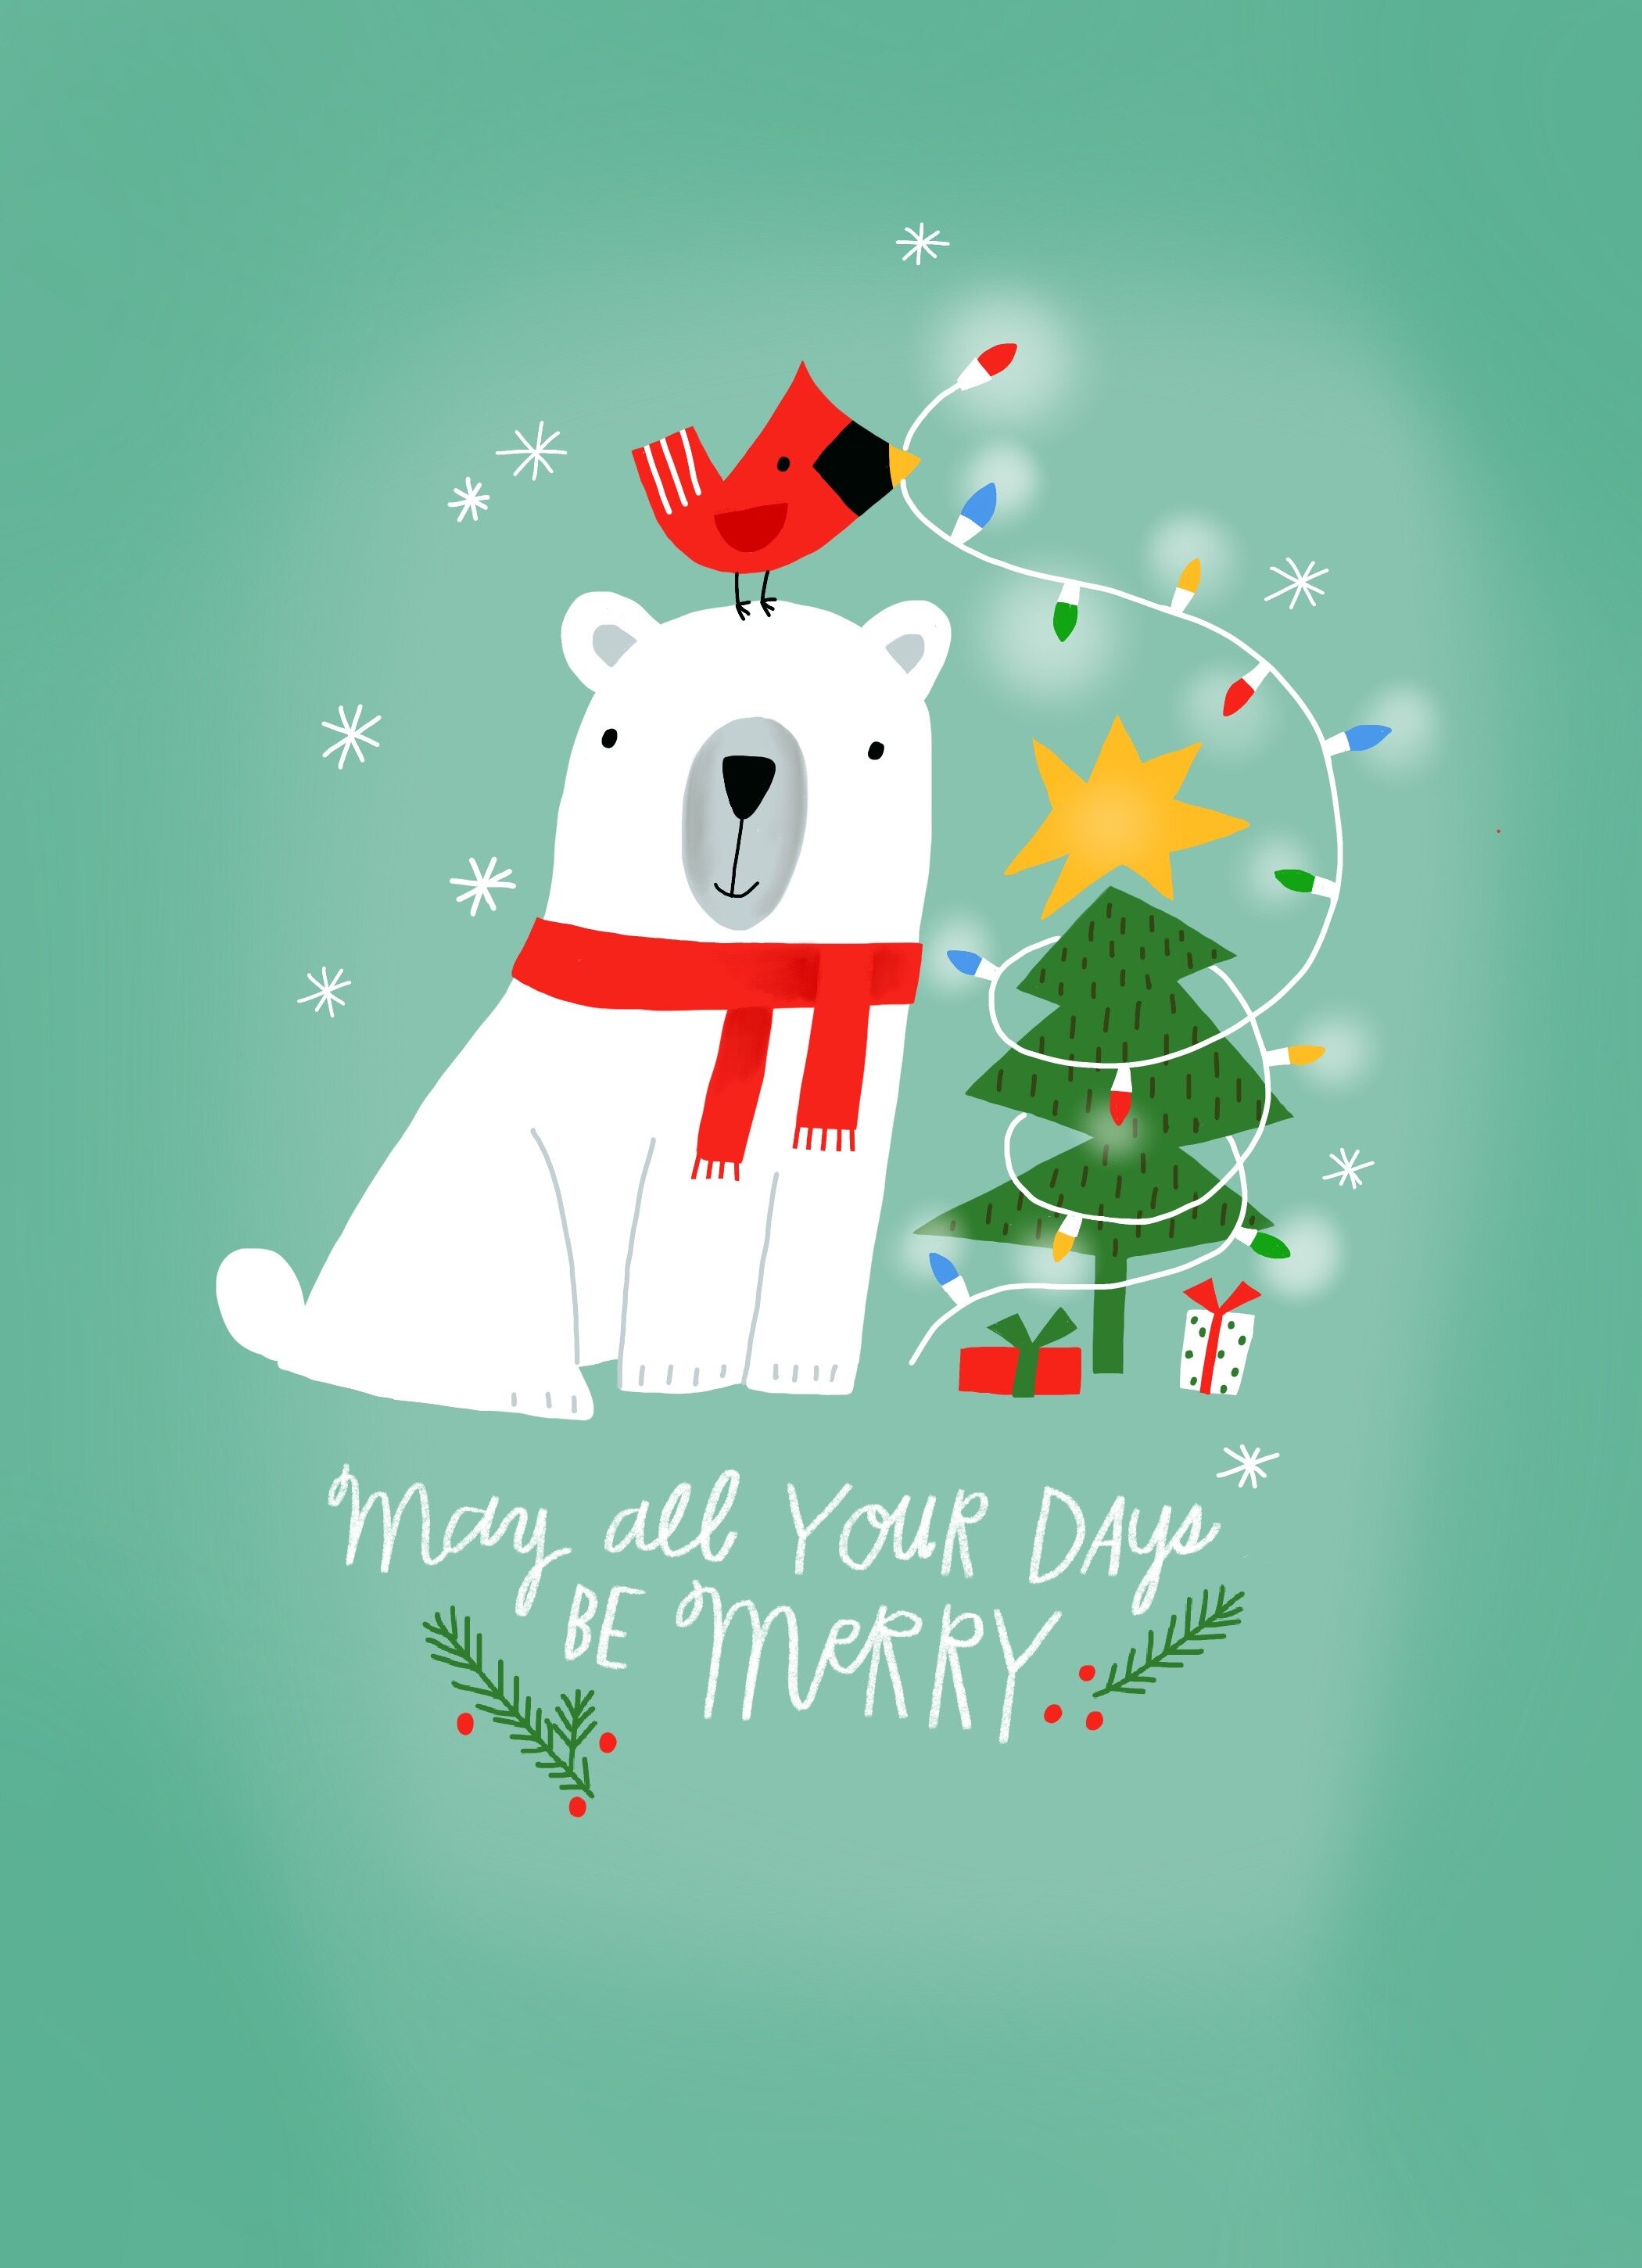 Cute Holiday Illustration for Great Arrow Graphics